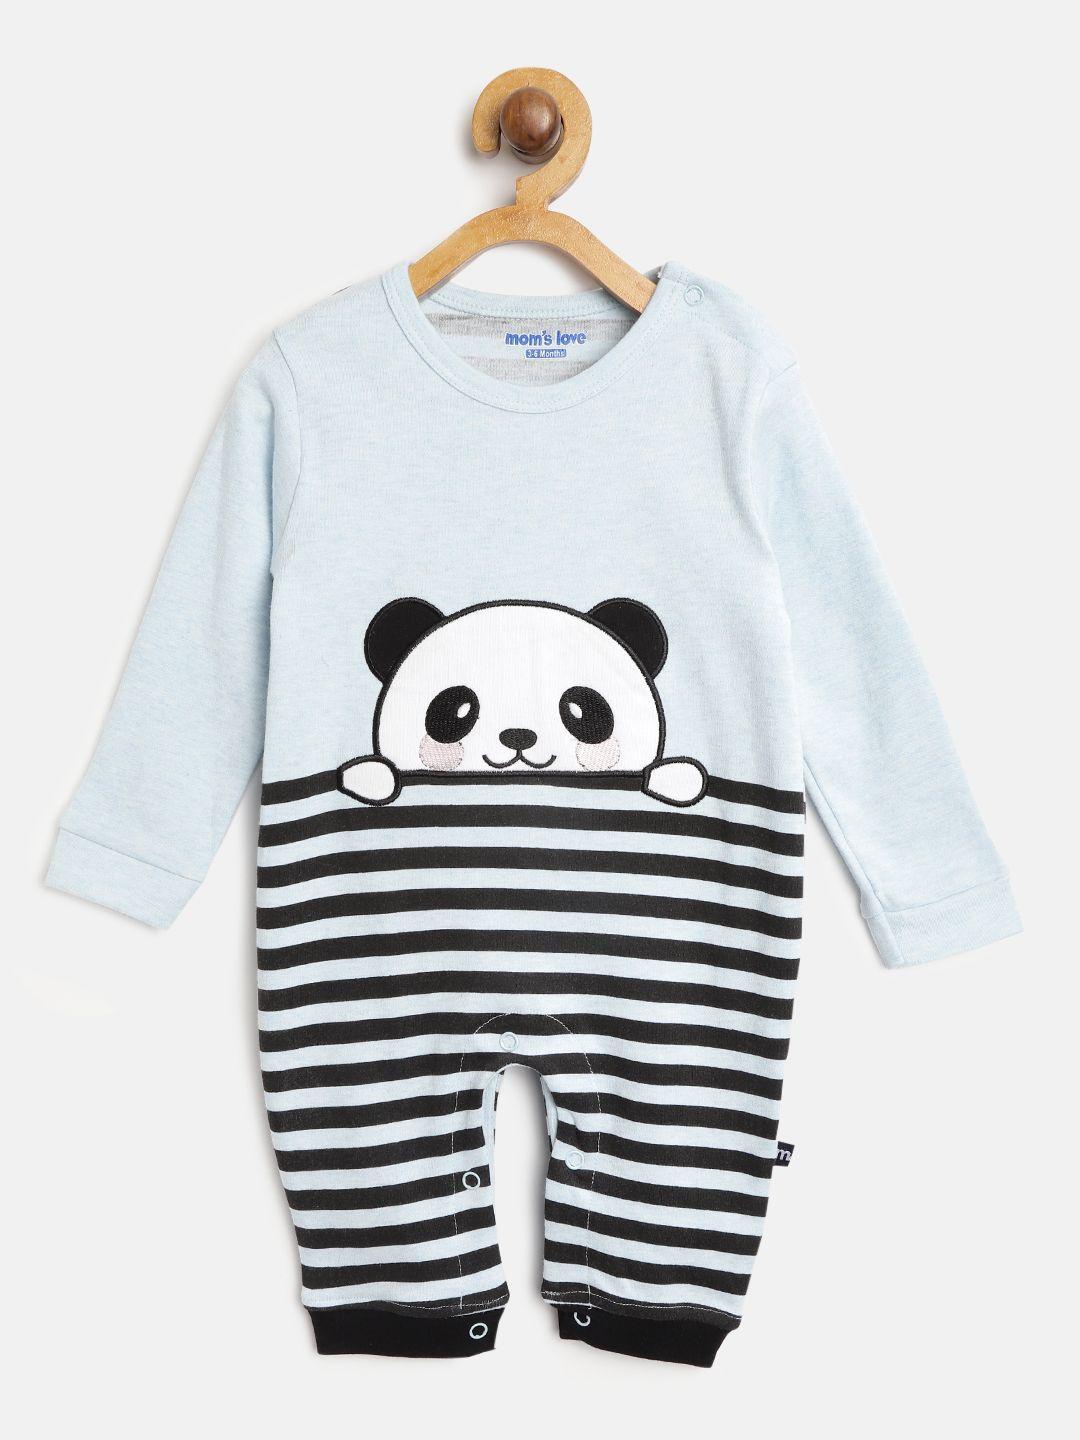 moms love boys blue & black striped rompers with panda applique detail